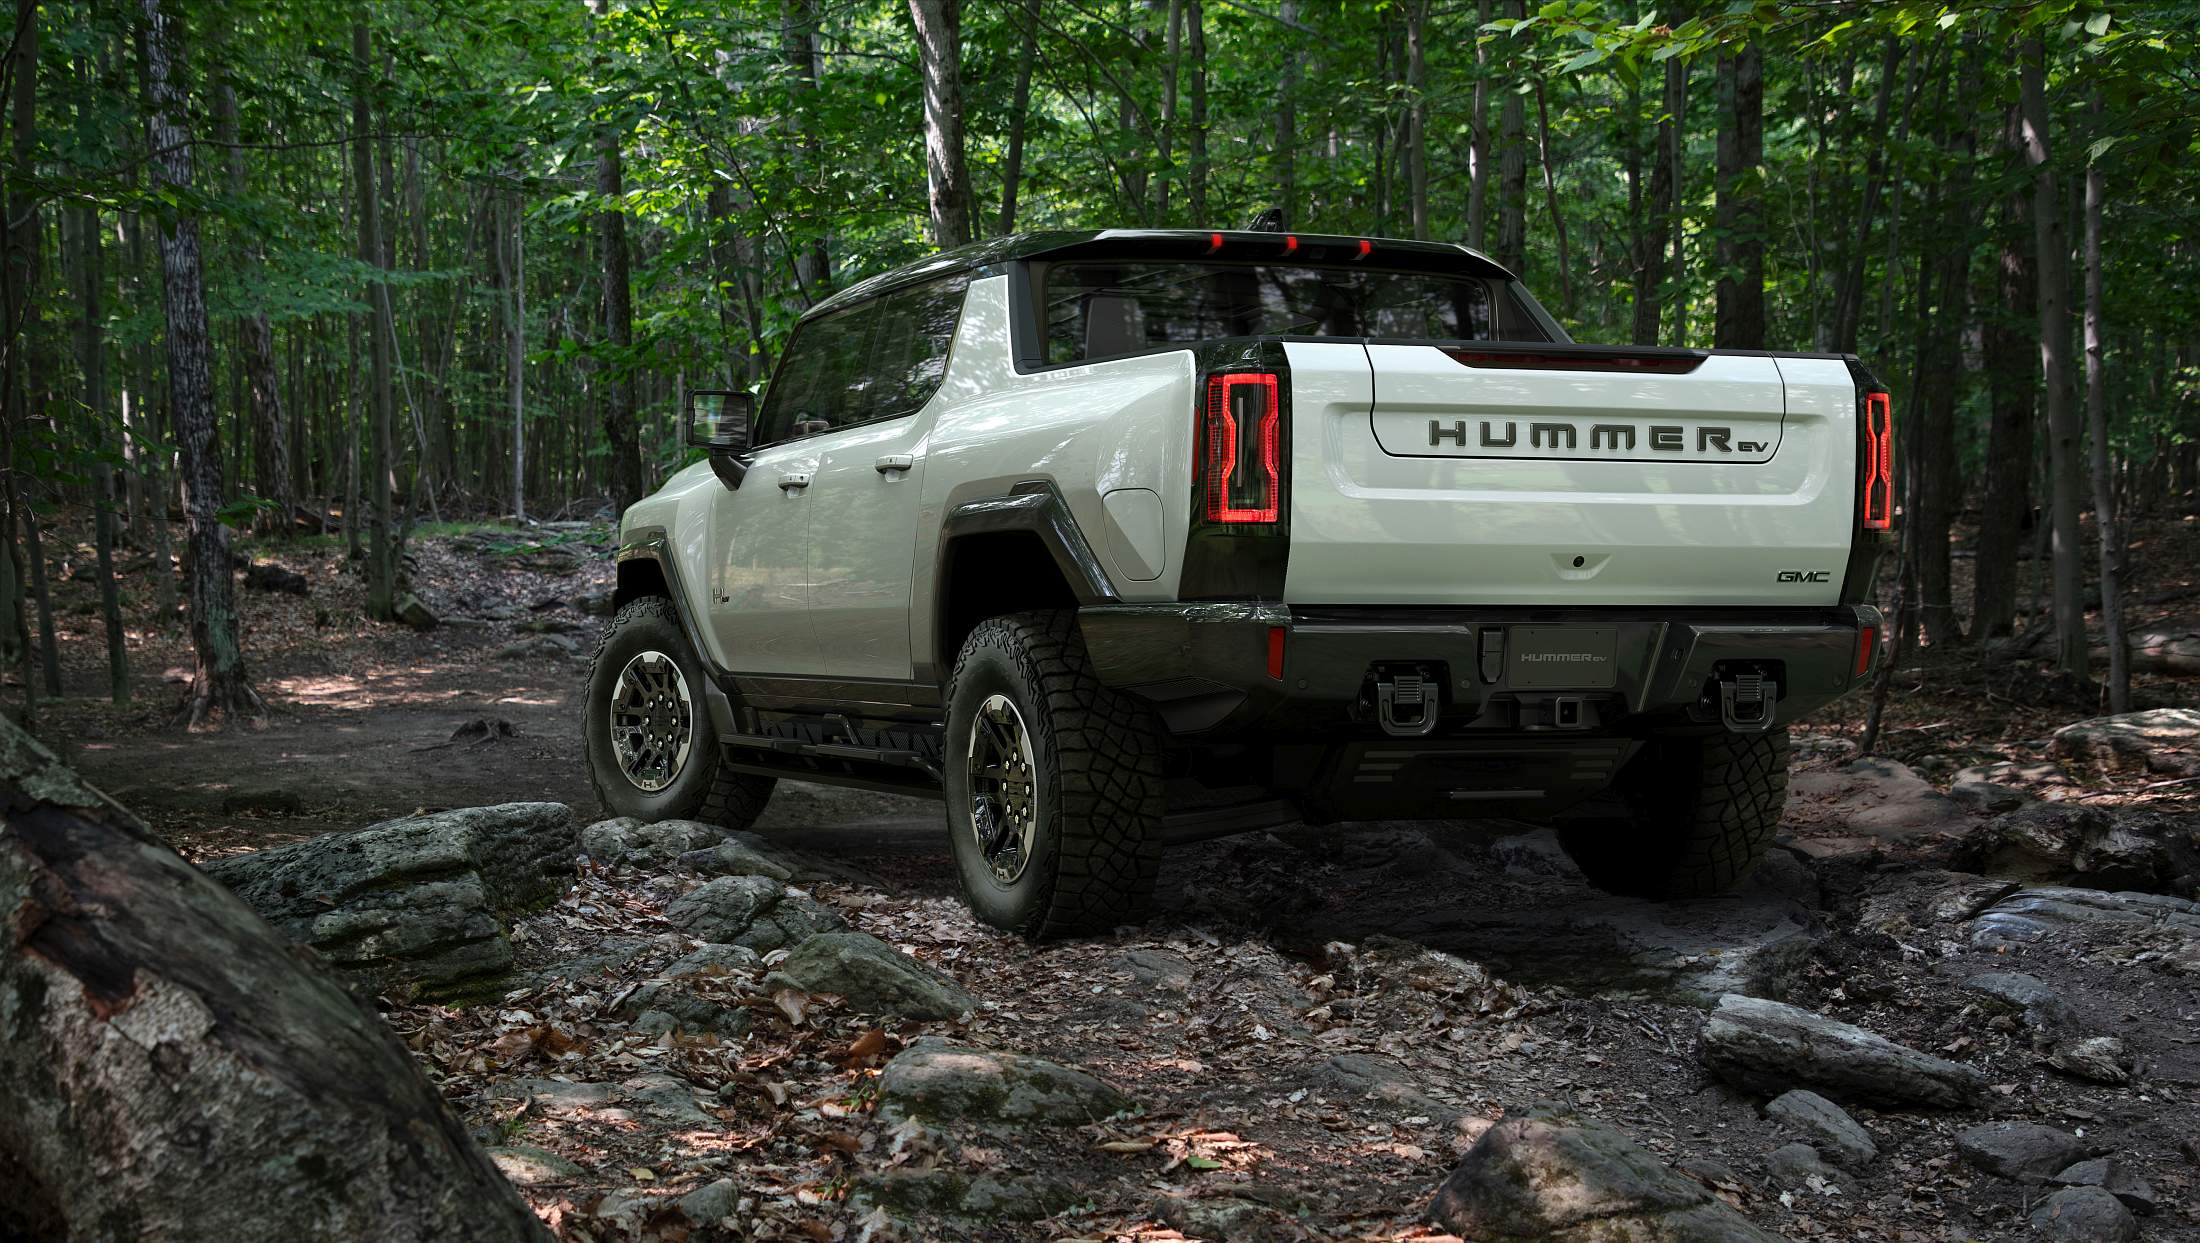 The GMC HUMMER EV is designed to be an off-road beast, with all-